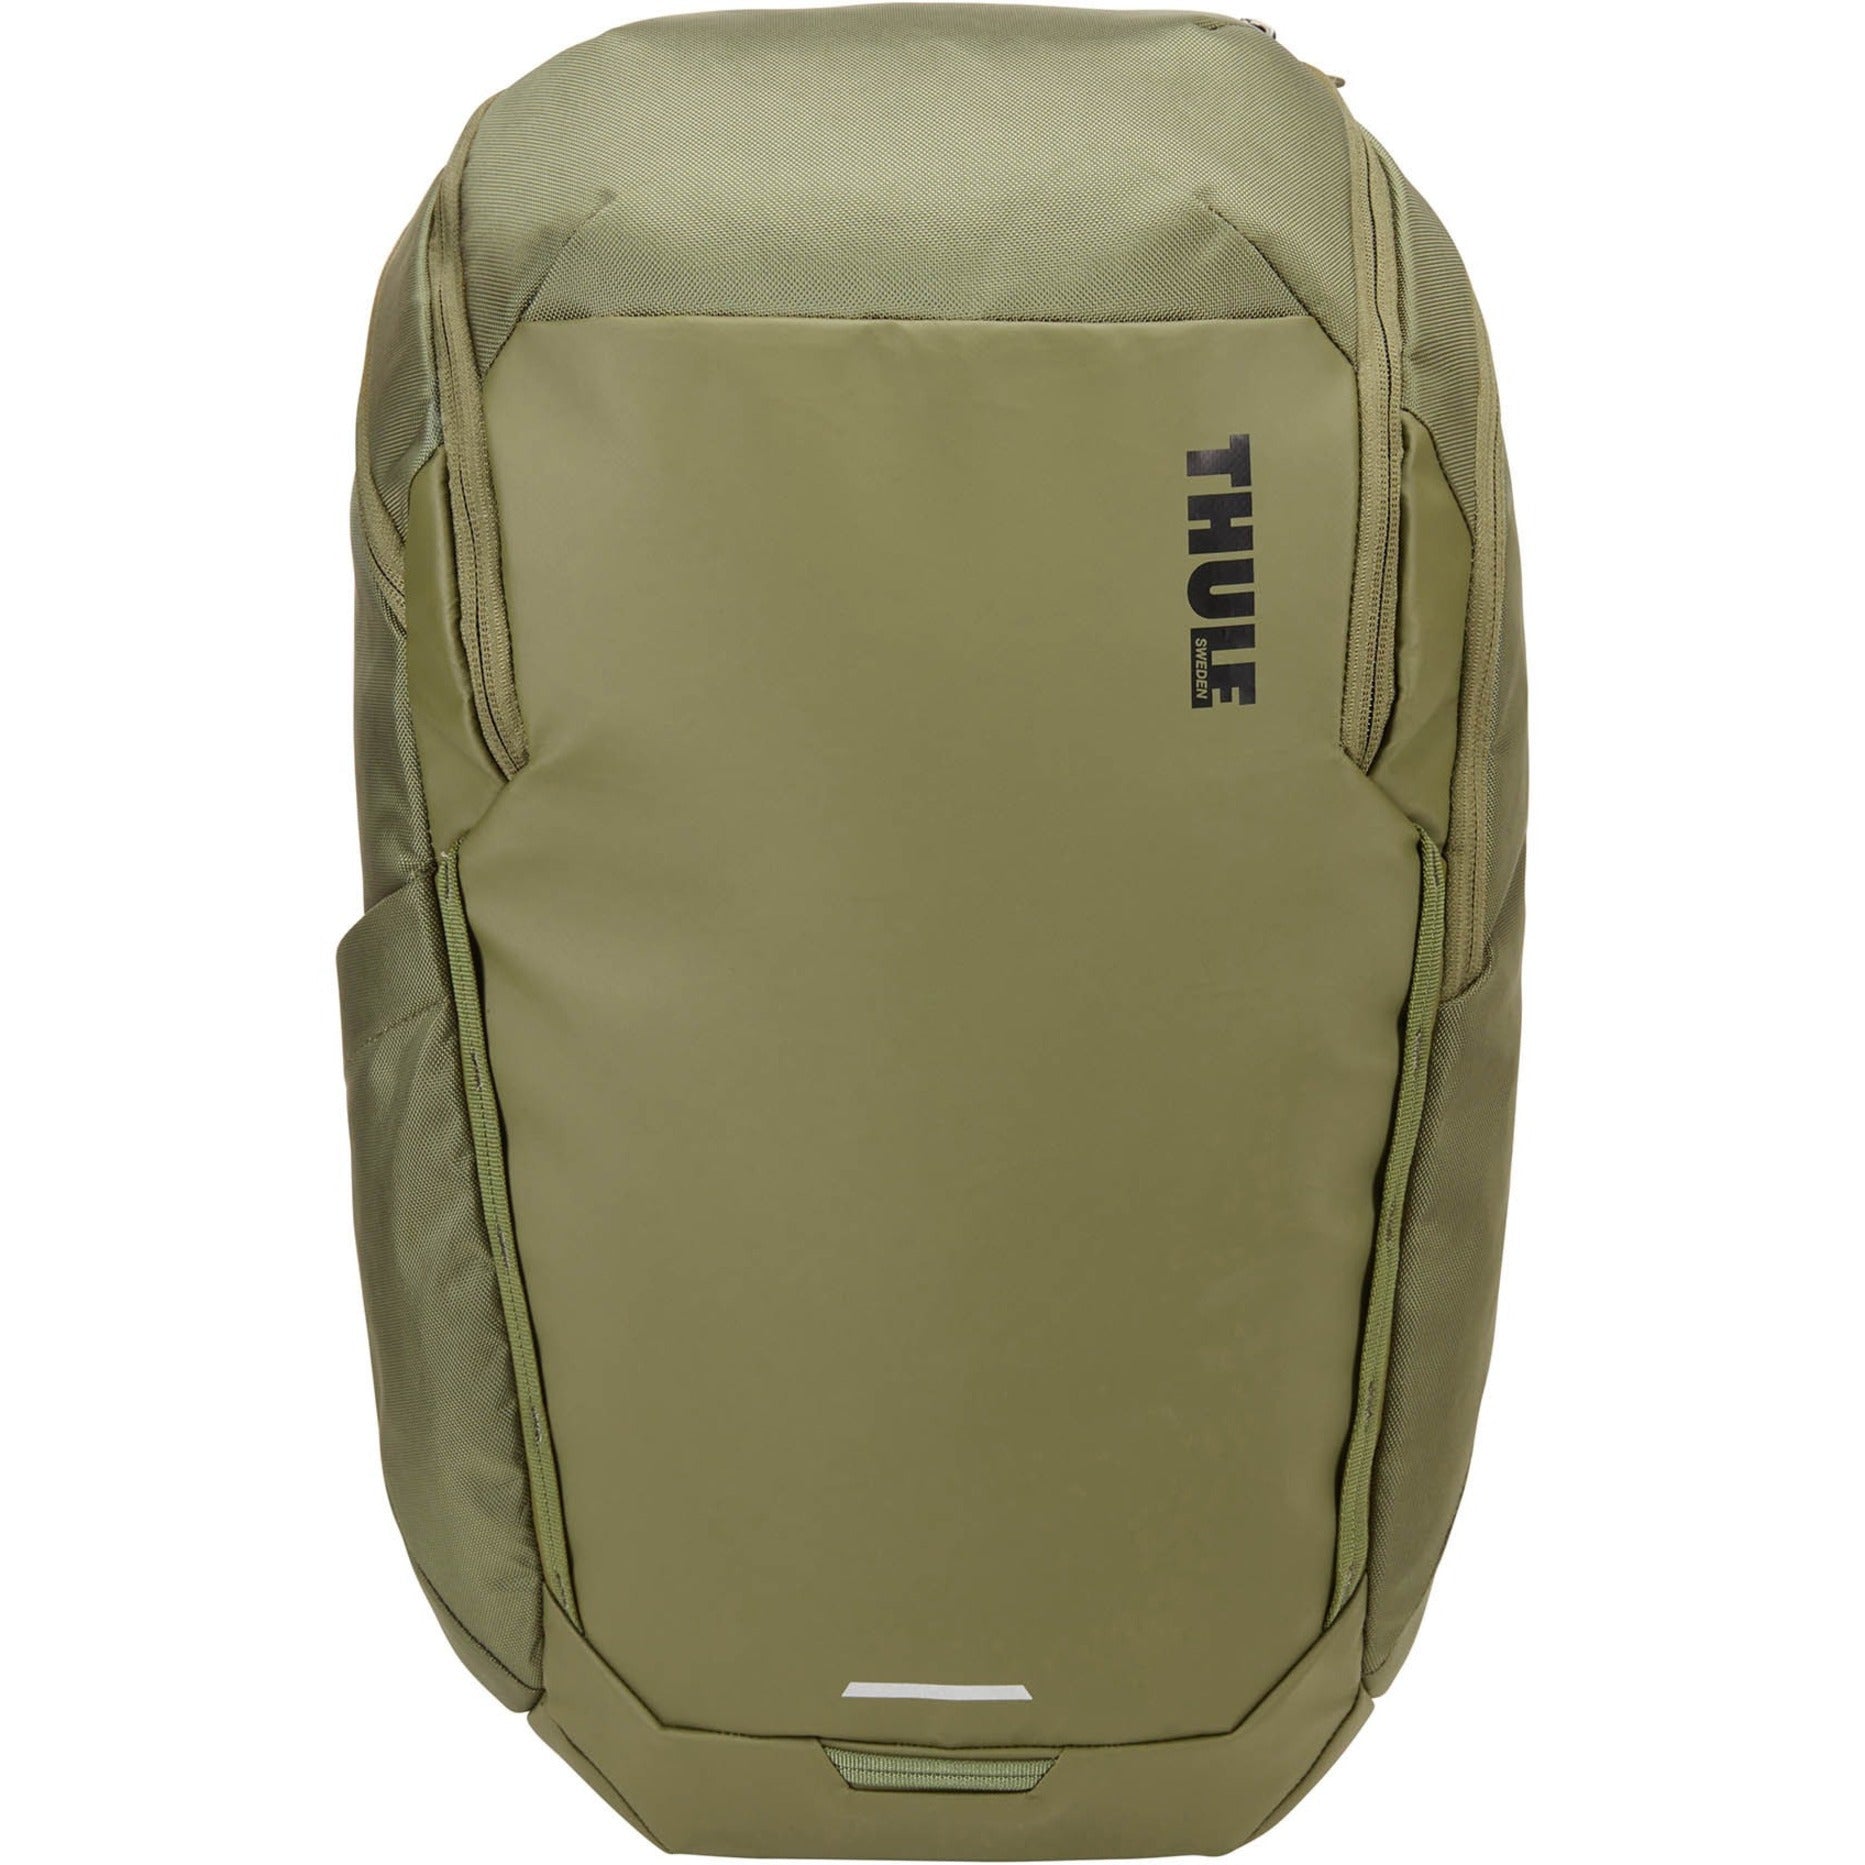 Thule 3204294 Chasm backpack 26L olivine, Sport, Notebook, Water Bottle, Accessories, MacBook carrying case